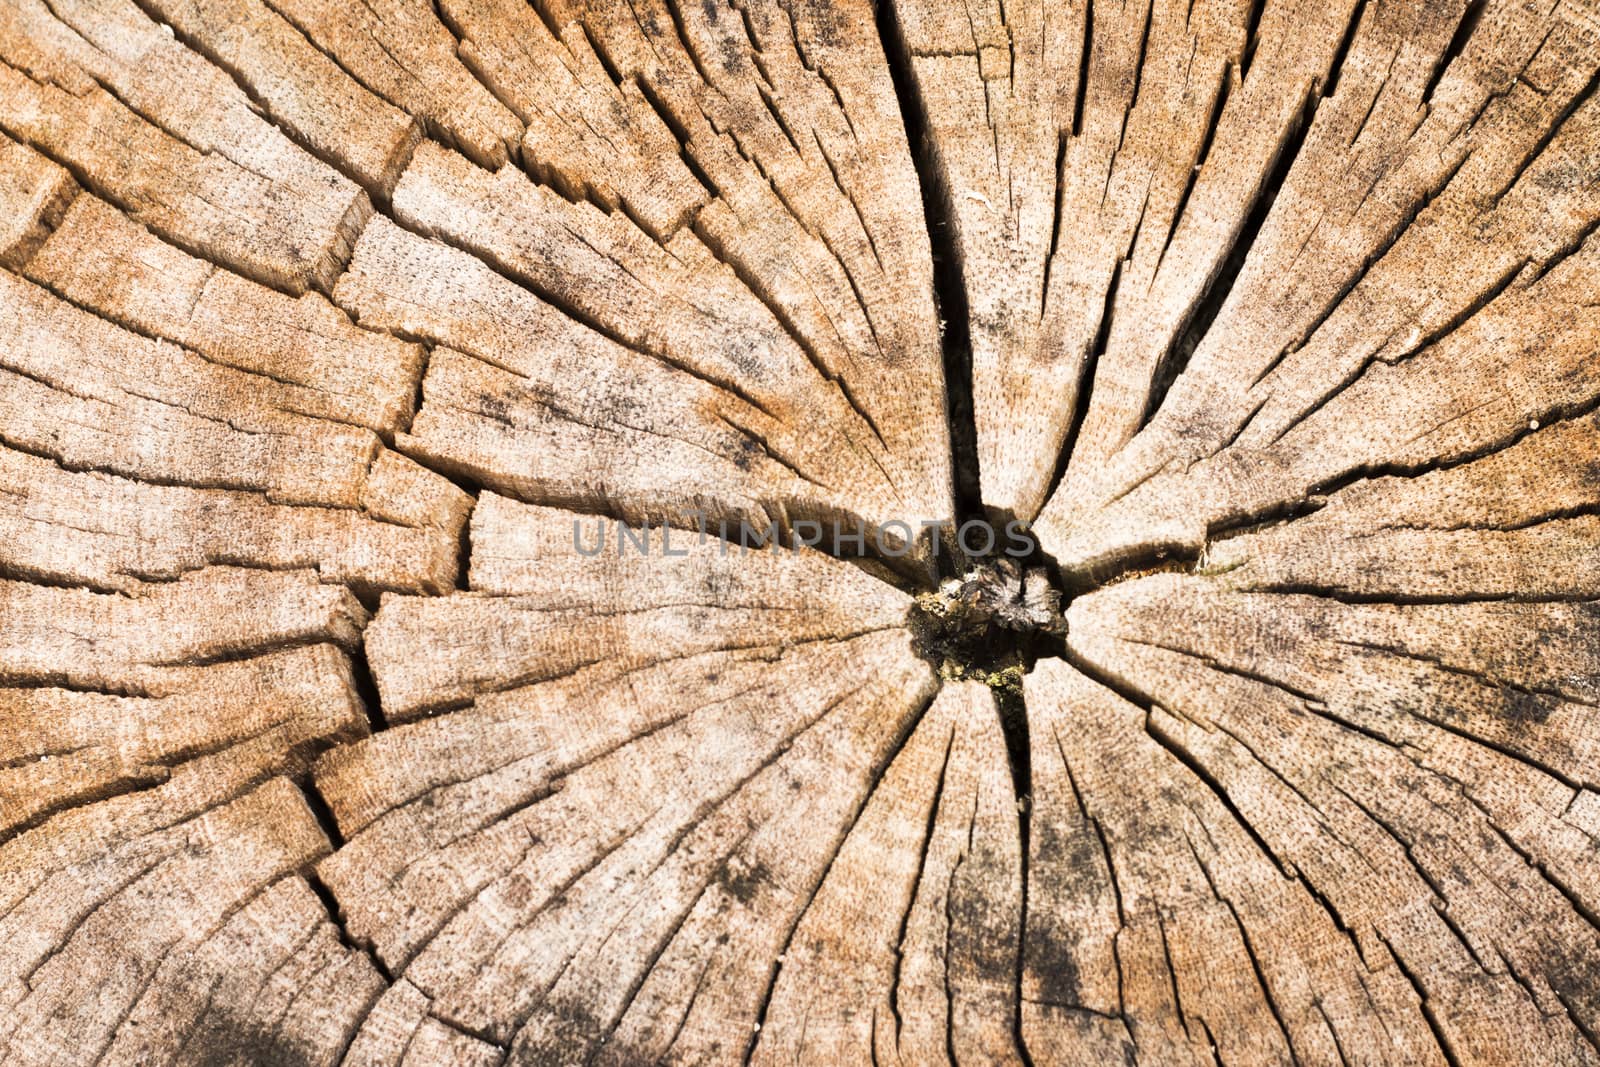  tree trunk texture or background